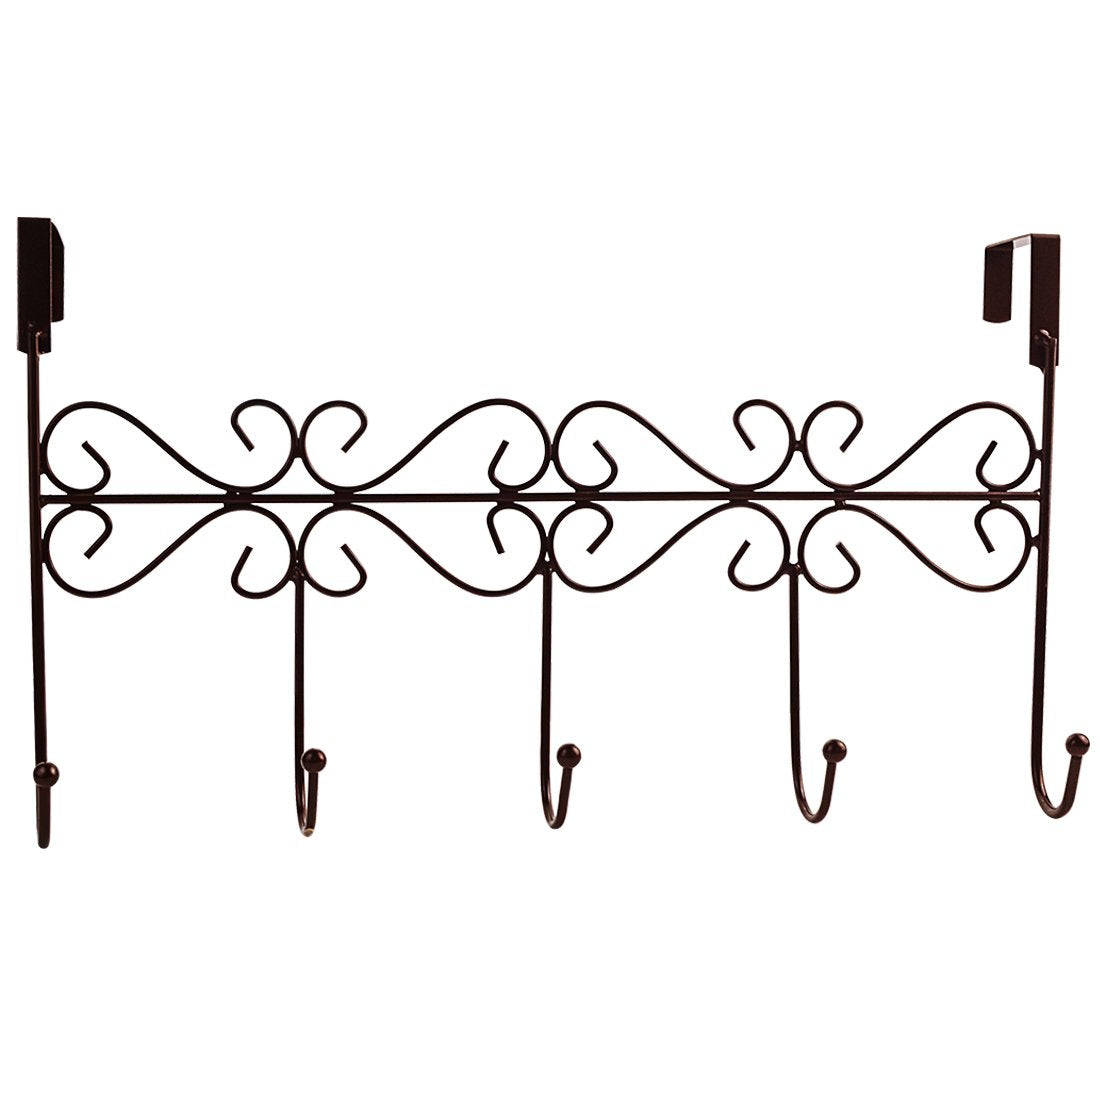 eKingstore Over the Door 5 Hook Rack - Decorative Hanger for Hanging Your Clothes , Coat , Hat Belt And More - Stylish Organizer for Your Home or Office - Best Lifetime Guarantee (Beautiful and Practical)